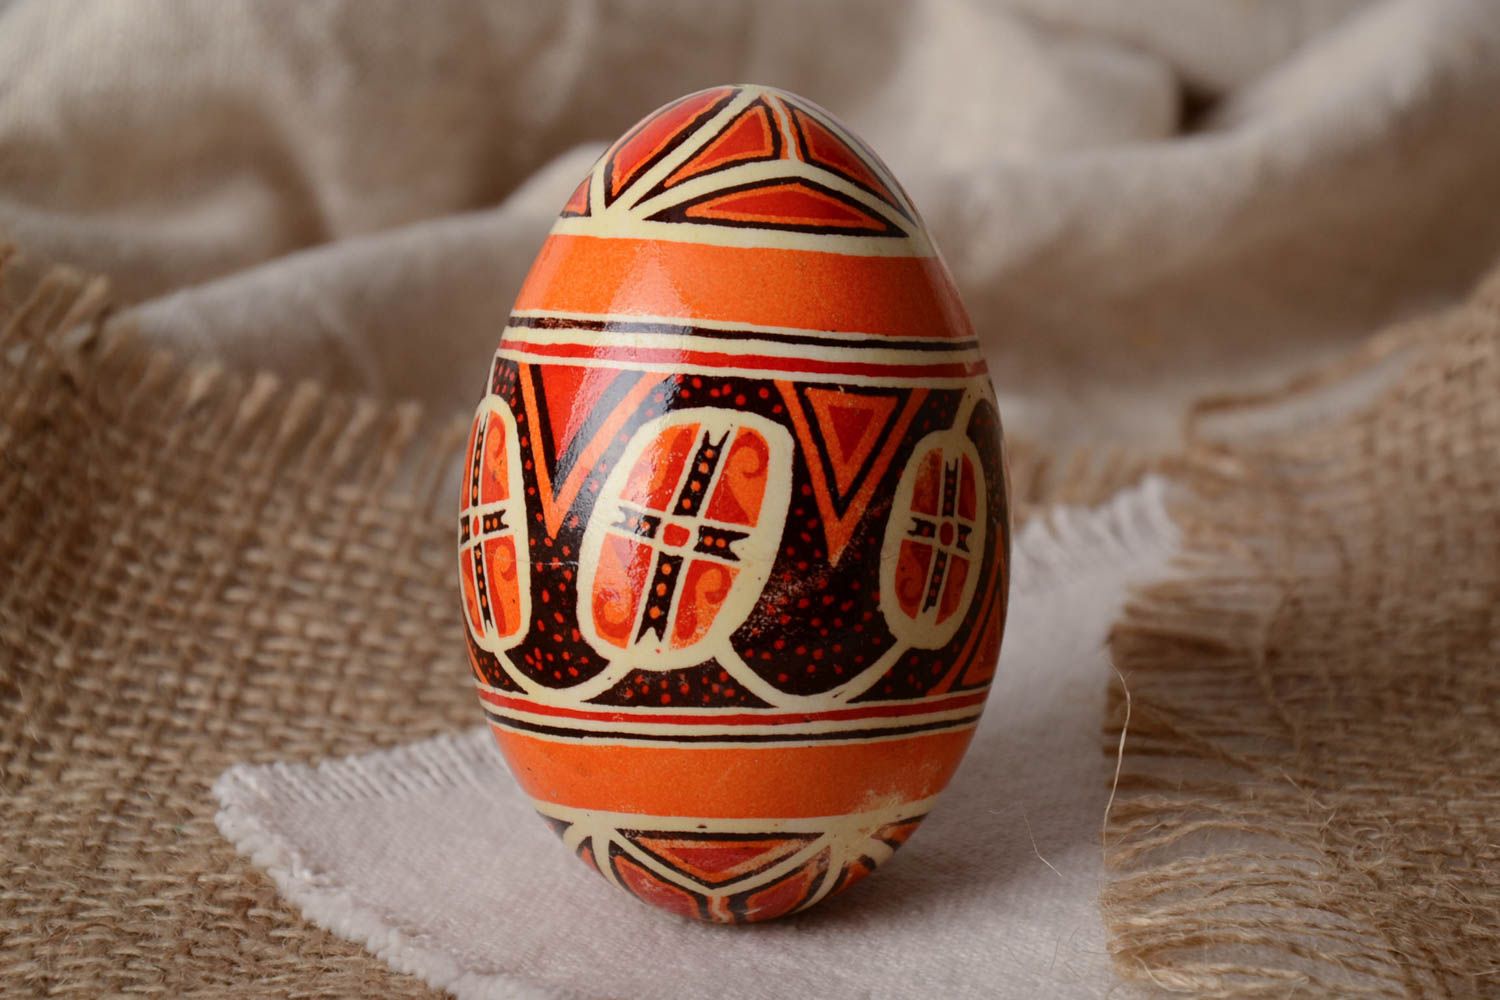 Handmade decorative Easter goose egg painted with hot wax and aniline dyes photo 1